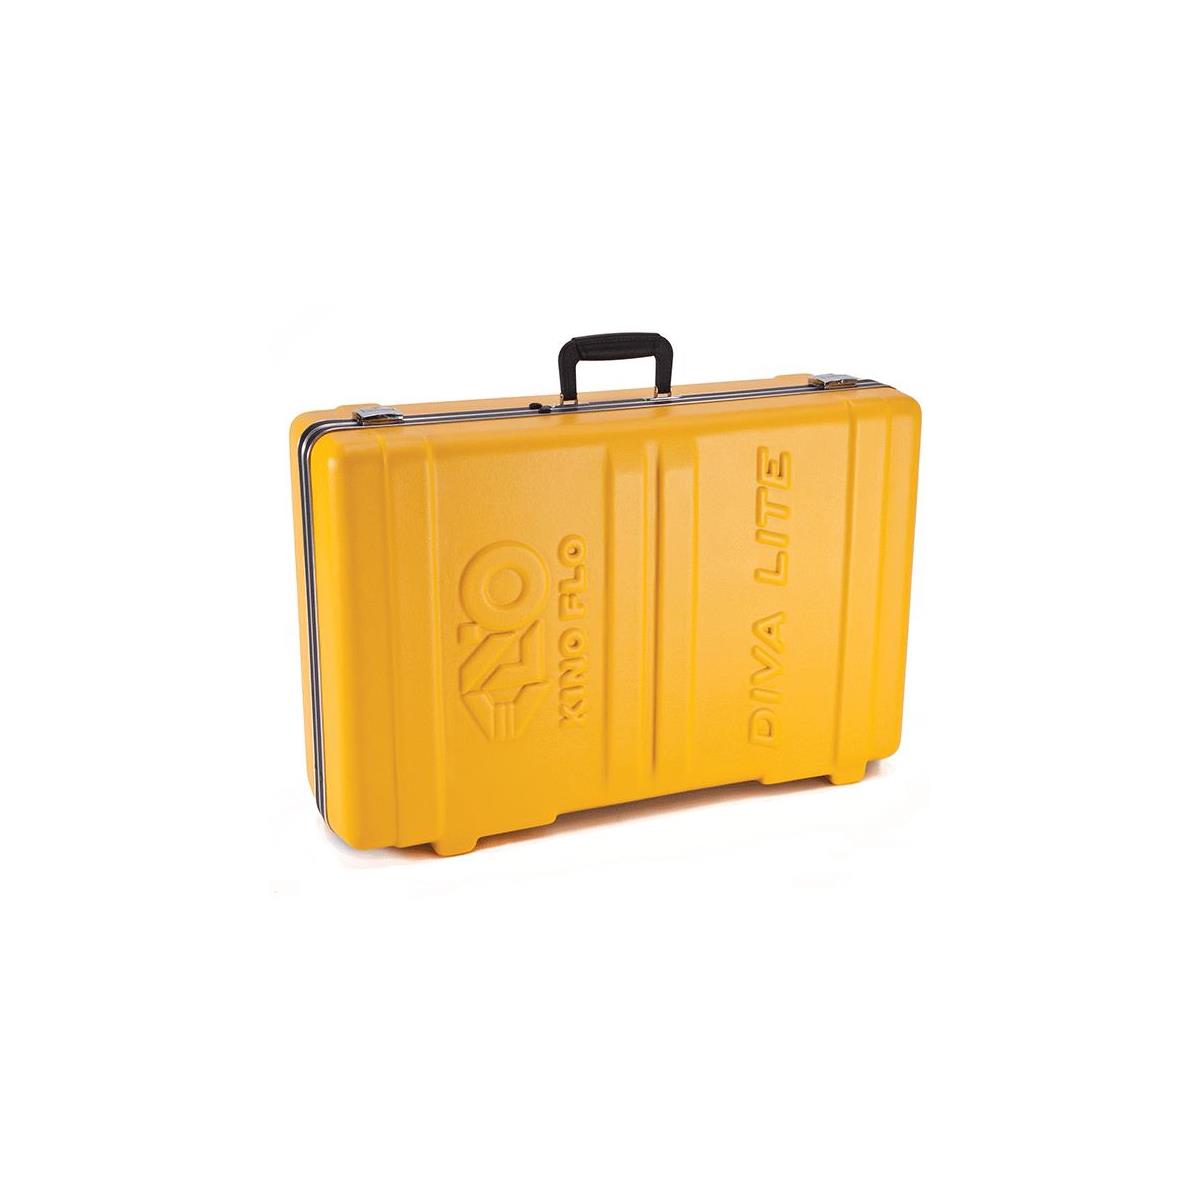 Image of Kino Flo Clamshell Case for Diva 20 Fixture and Accessories (Yellow)